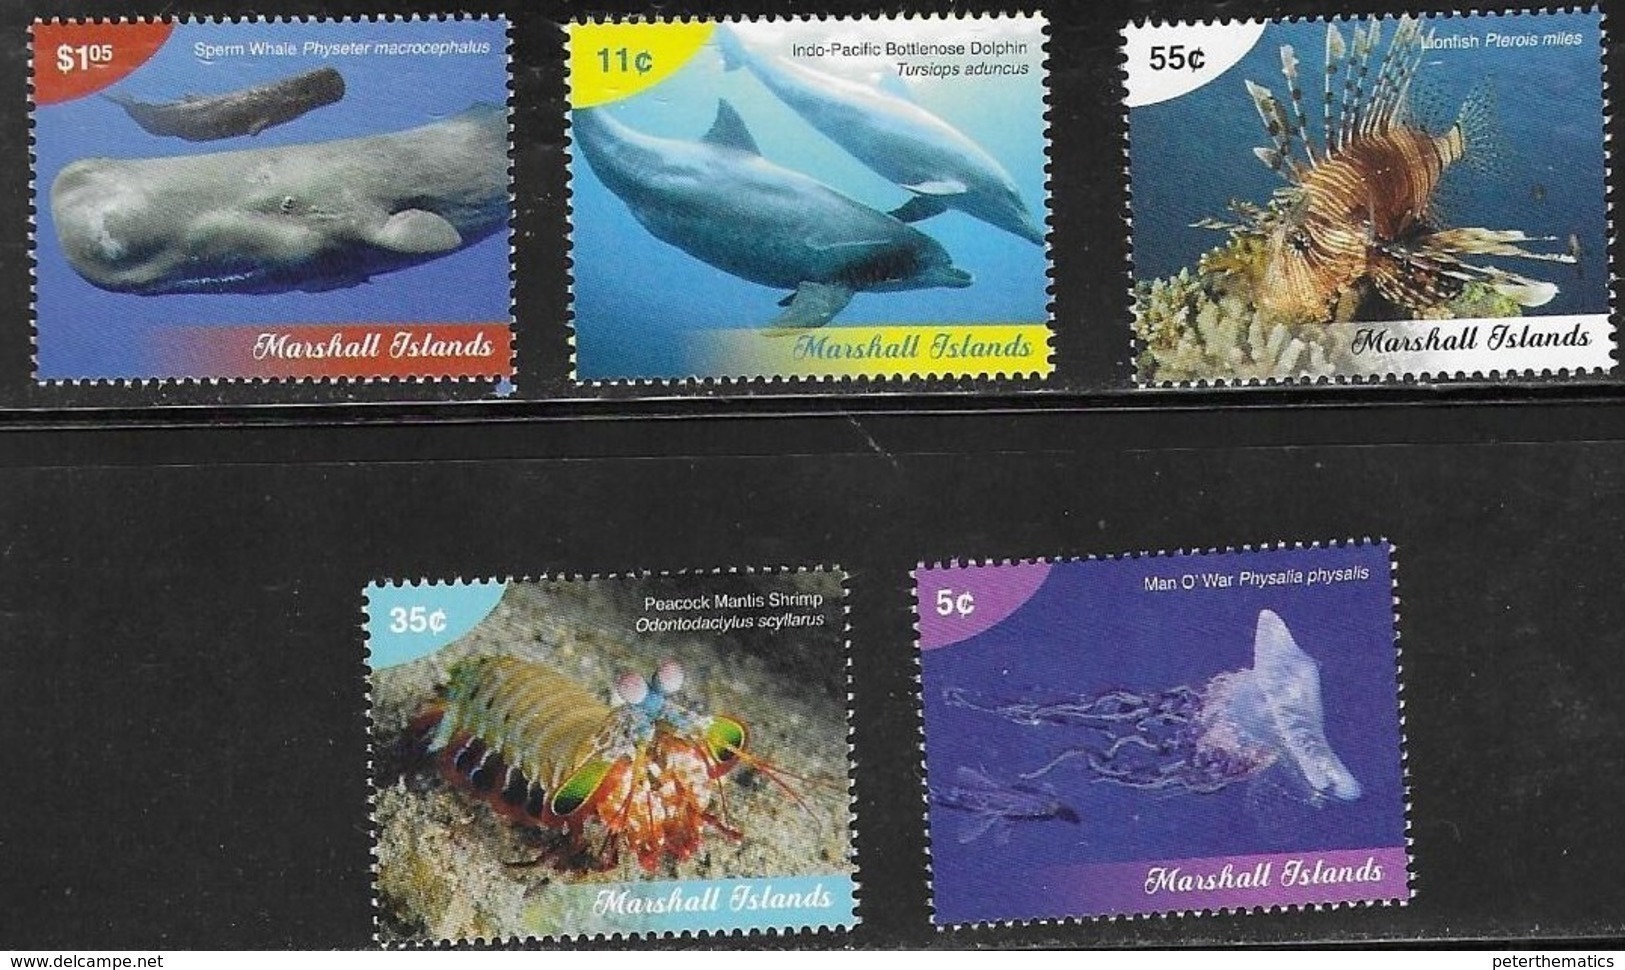 MARSHALL ISLANDS, 2019, MNH, MARINE LIFE DEFINITVES, WHALES, DOLPHINS, LION FISH, JELLYFISH, CRUSTACEANS, 5v - Whales